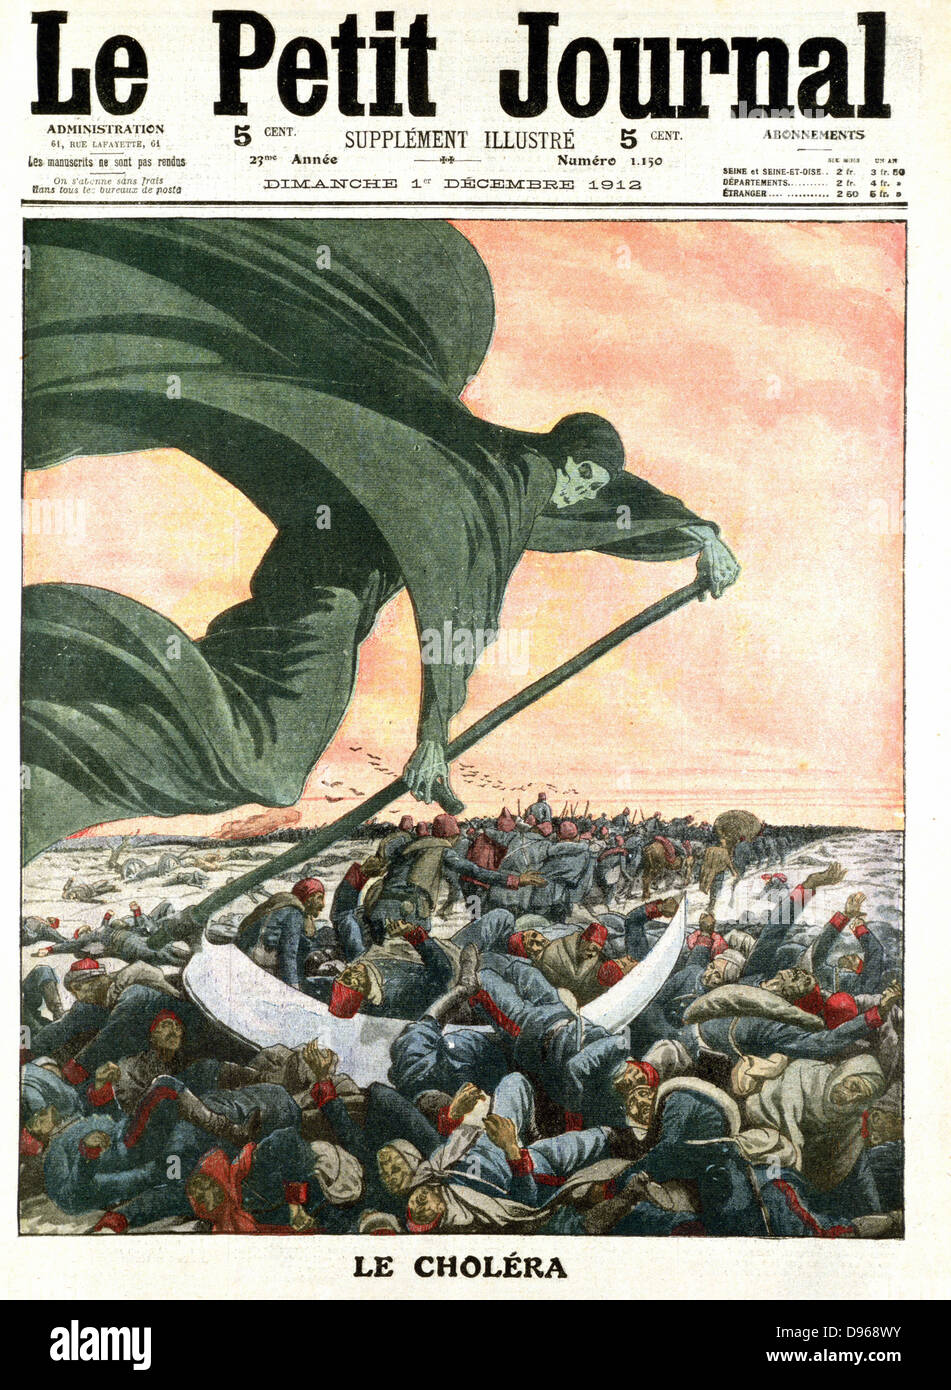 Death, the grim reaper. Turkish army defeated by Cholera, not enemy, approaching Luleburgaz in disorder: 100 deaths per day. Illustration from 'Le Petit Journal', Paris, 1 December 1912. First Balkan War 1912-1913: Balkan League (Bulgaria, Serbia, Greece, Montenegro) against Turkey. Stock Photo